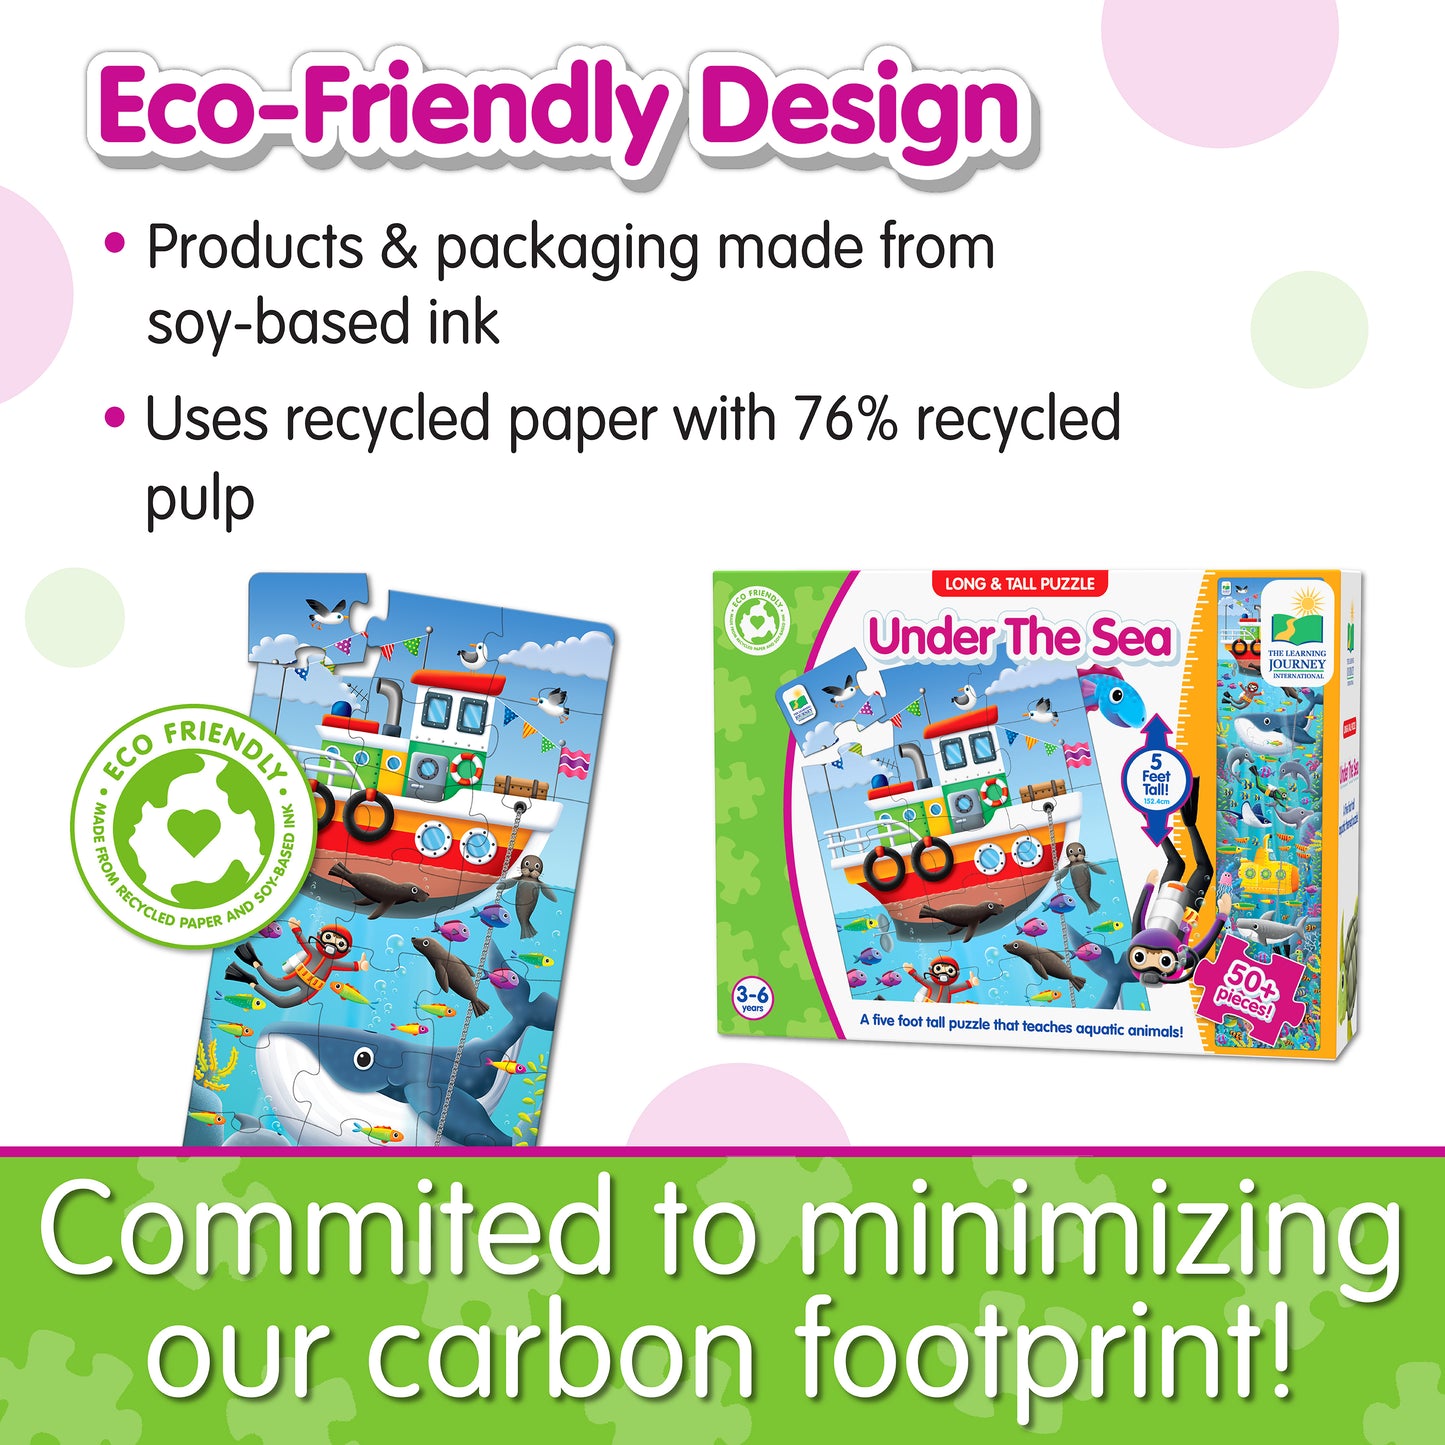 Infographic about Long and Tall Under The Sea Puzzle's eco-friendly design that says, "Committed to minimizing our carbon footprint!"